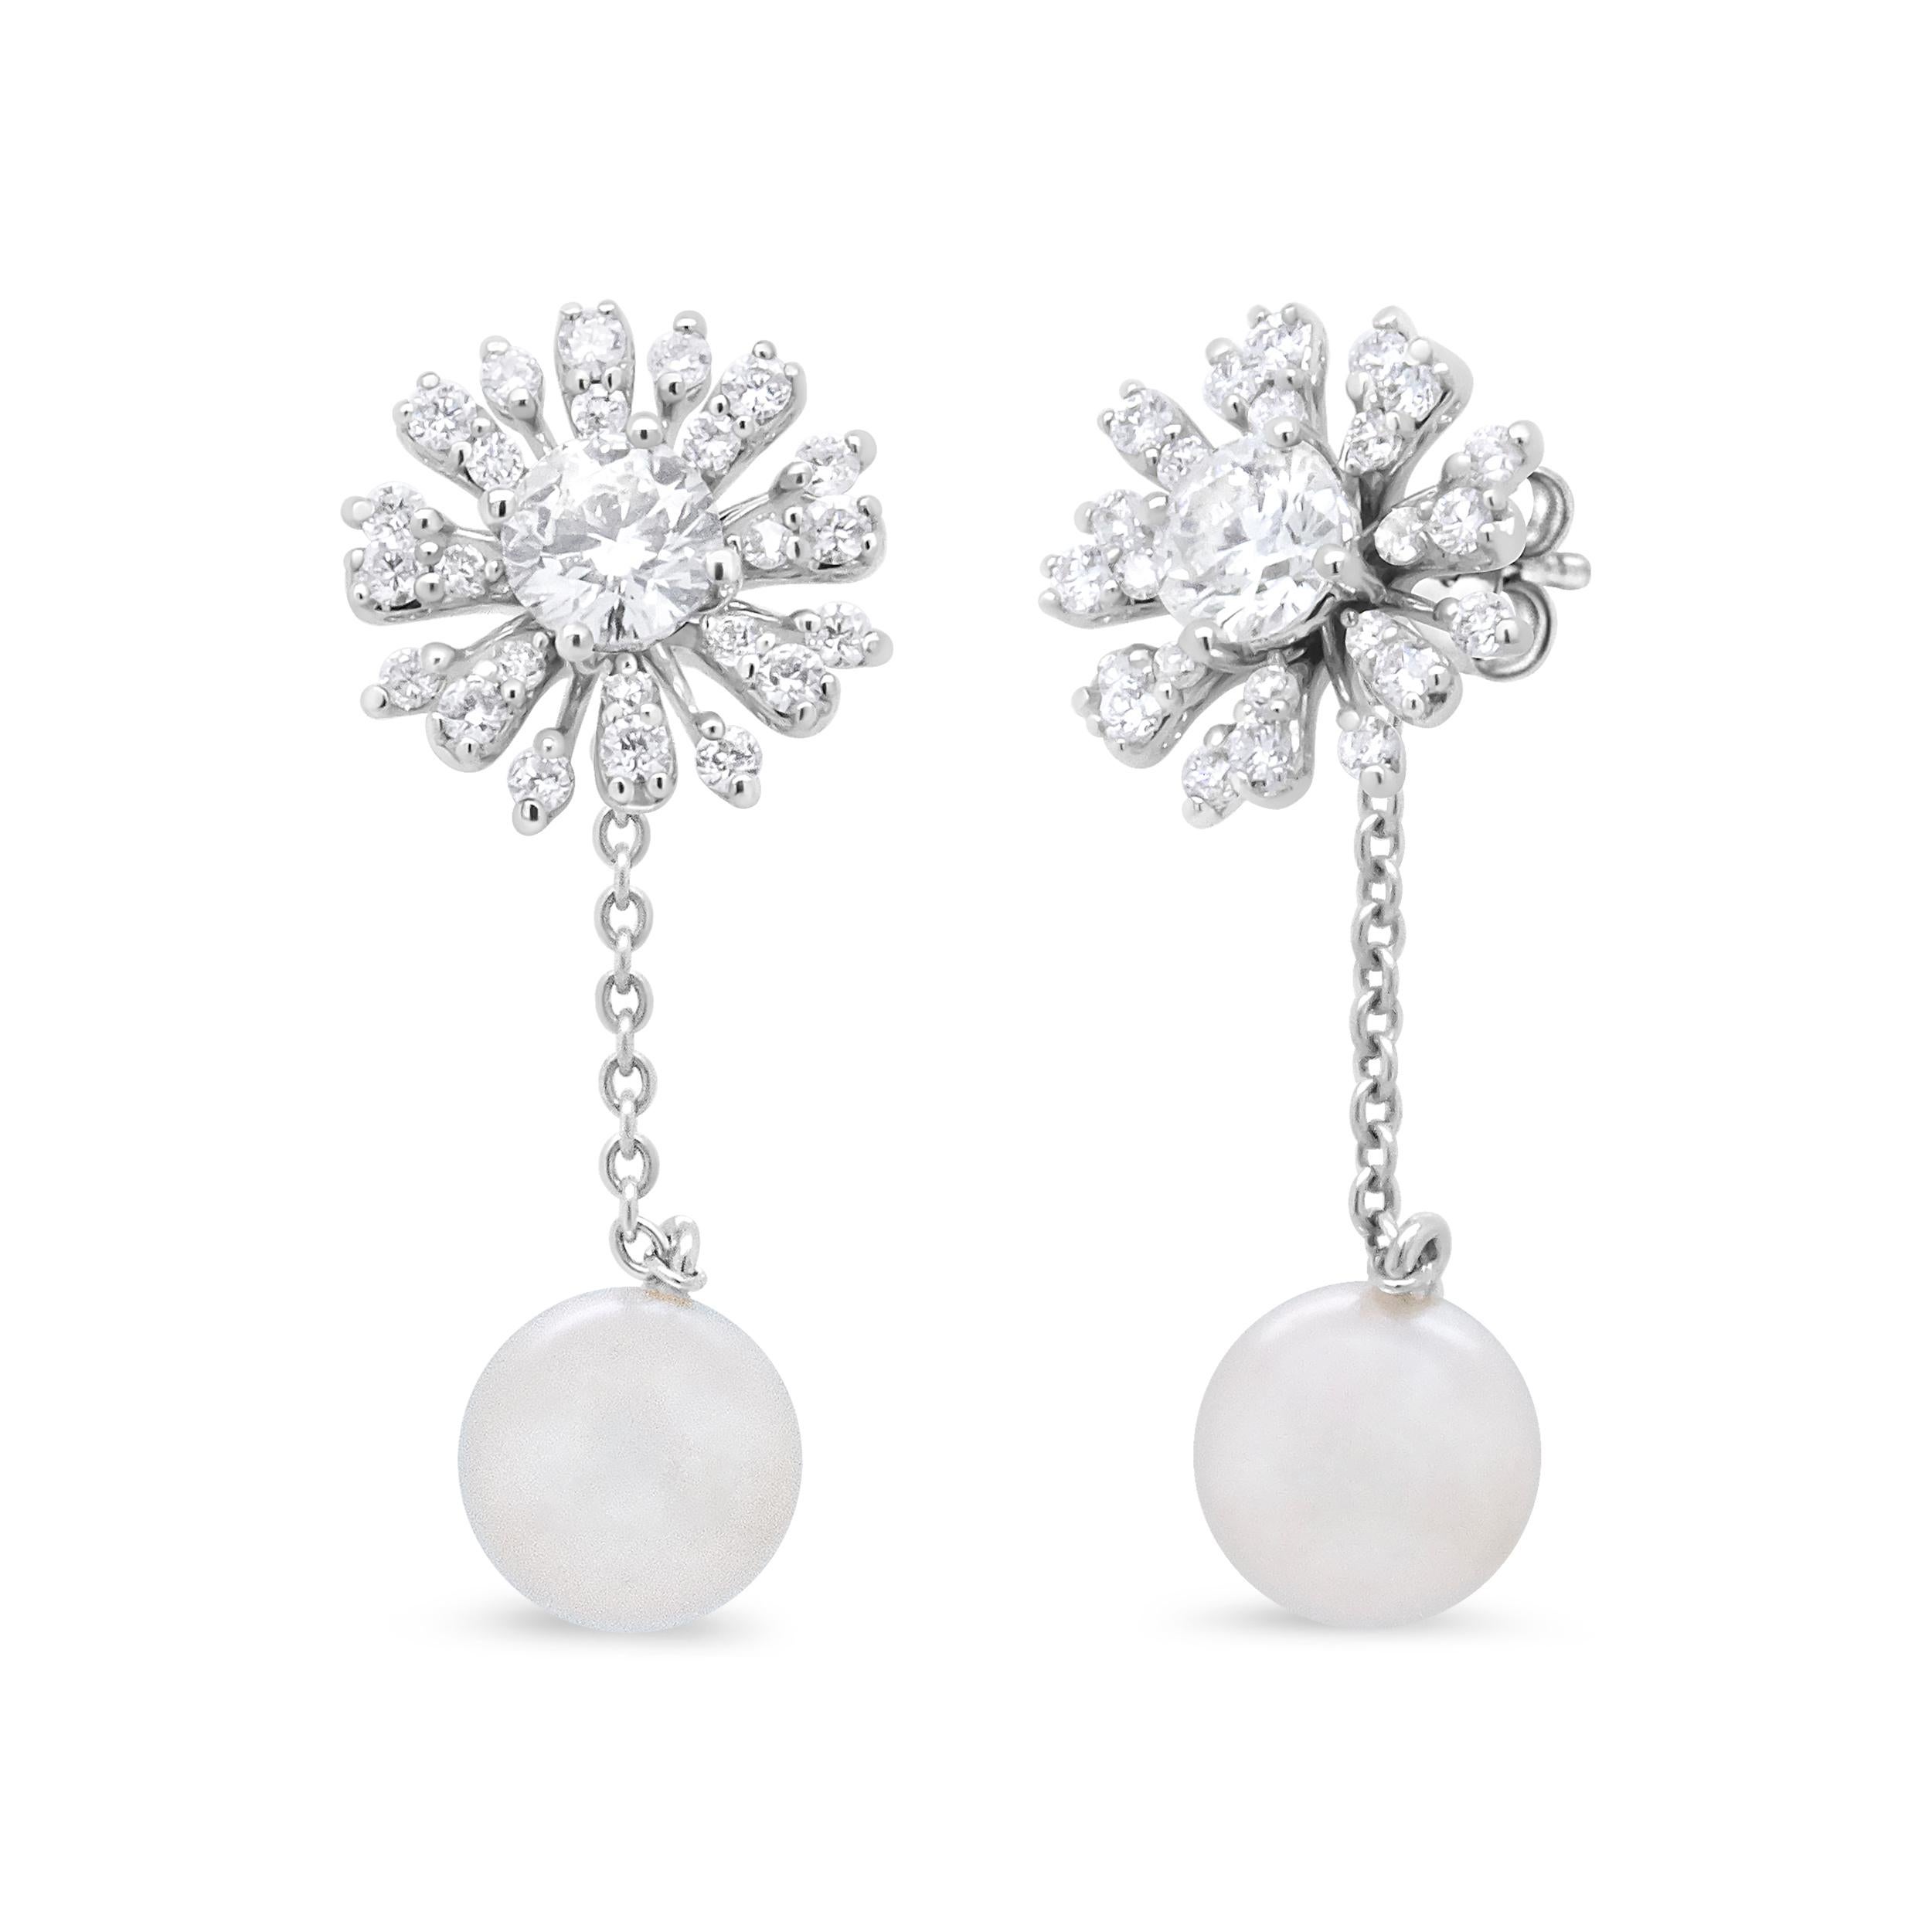 Exuding elegance from top to bottom, these 18k white gold drop earrings feature an enchanting 3/4 inch dangle length emblazoned with diamonds and freshwater pearls. The upper dangle is a brilliant flower silhouette prong-set with the astounding